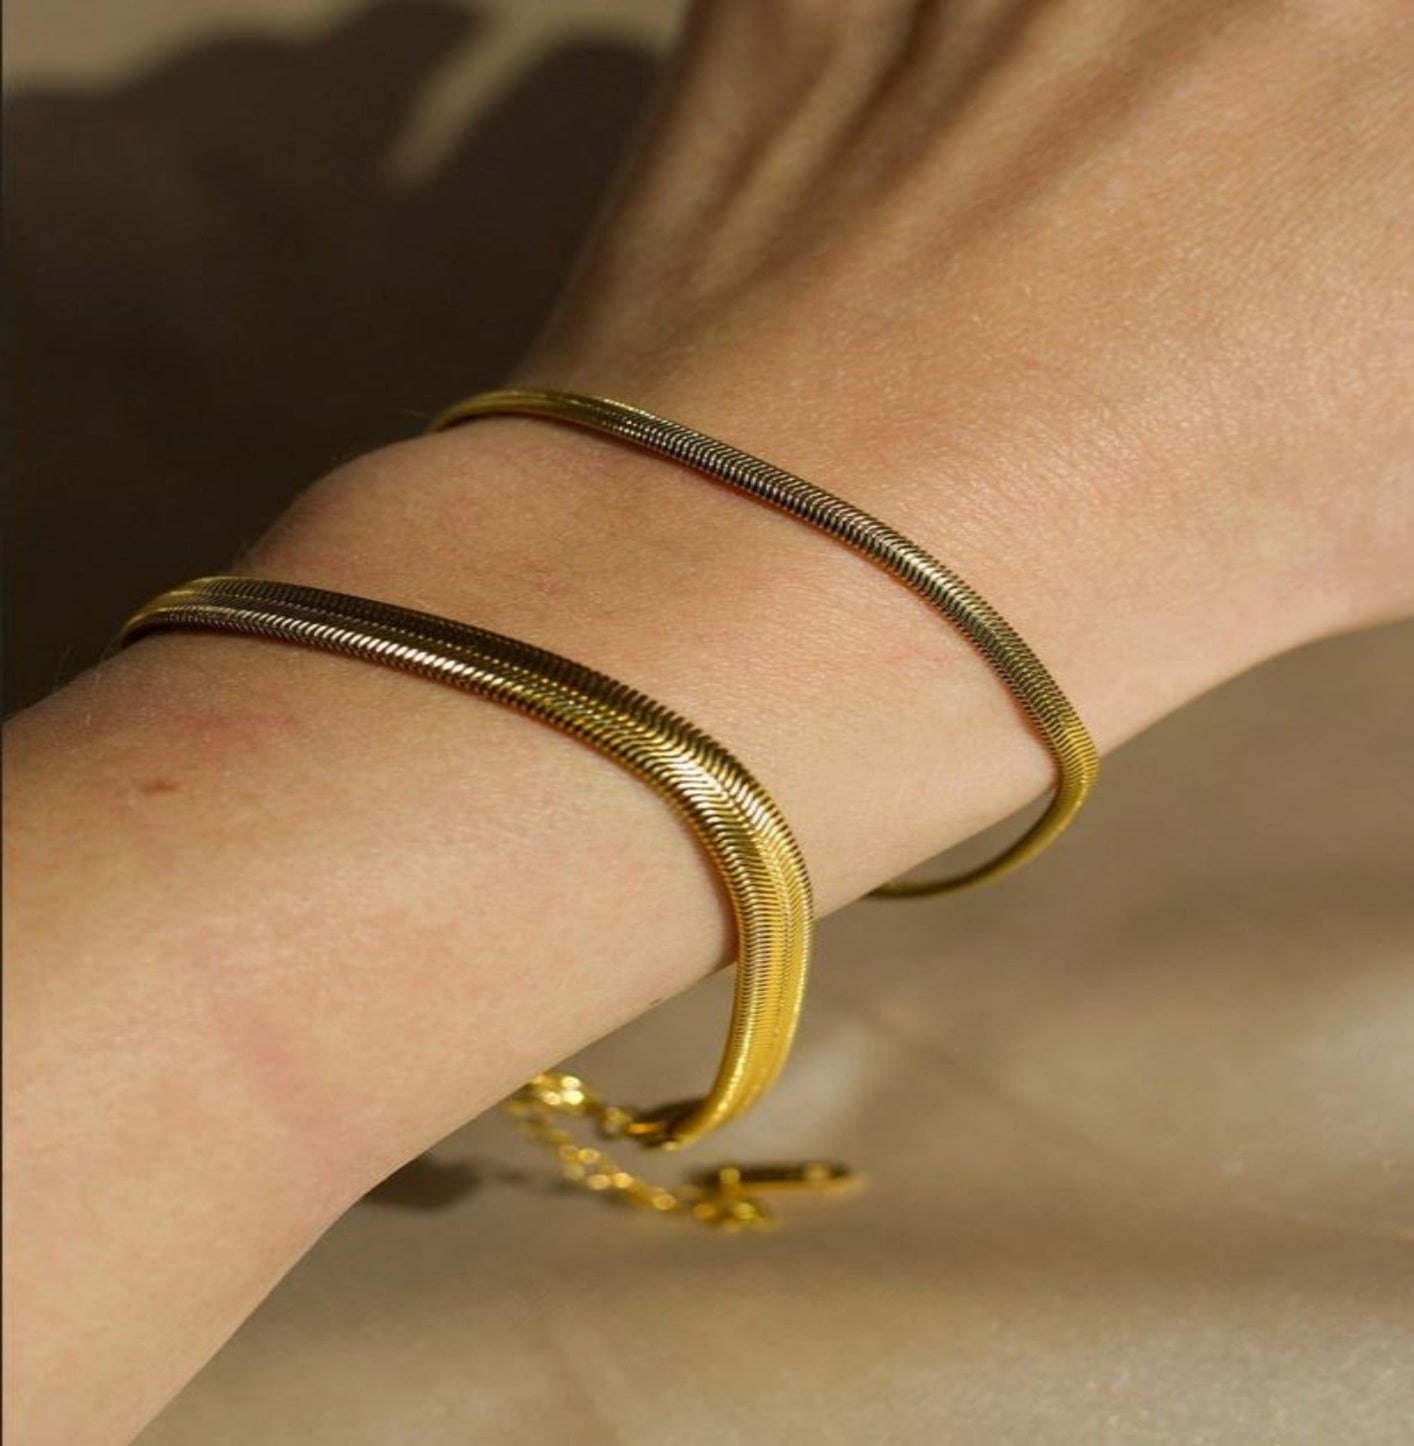 SNAKE CHAIN BRACELET braclet Yubama Jewelry Online Store - The Elegant Designs of Gold and Silver ! 